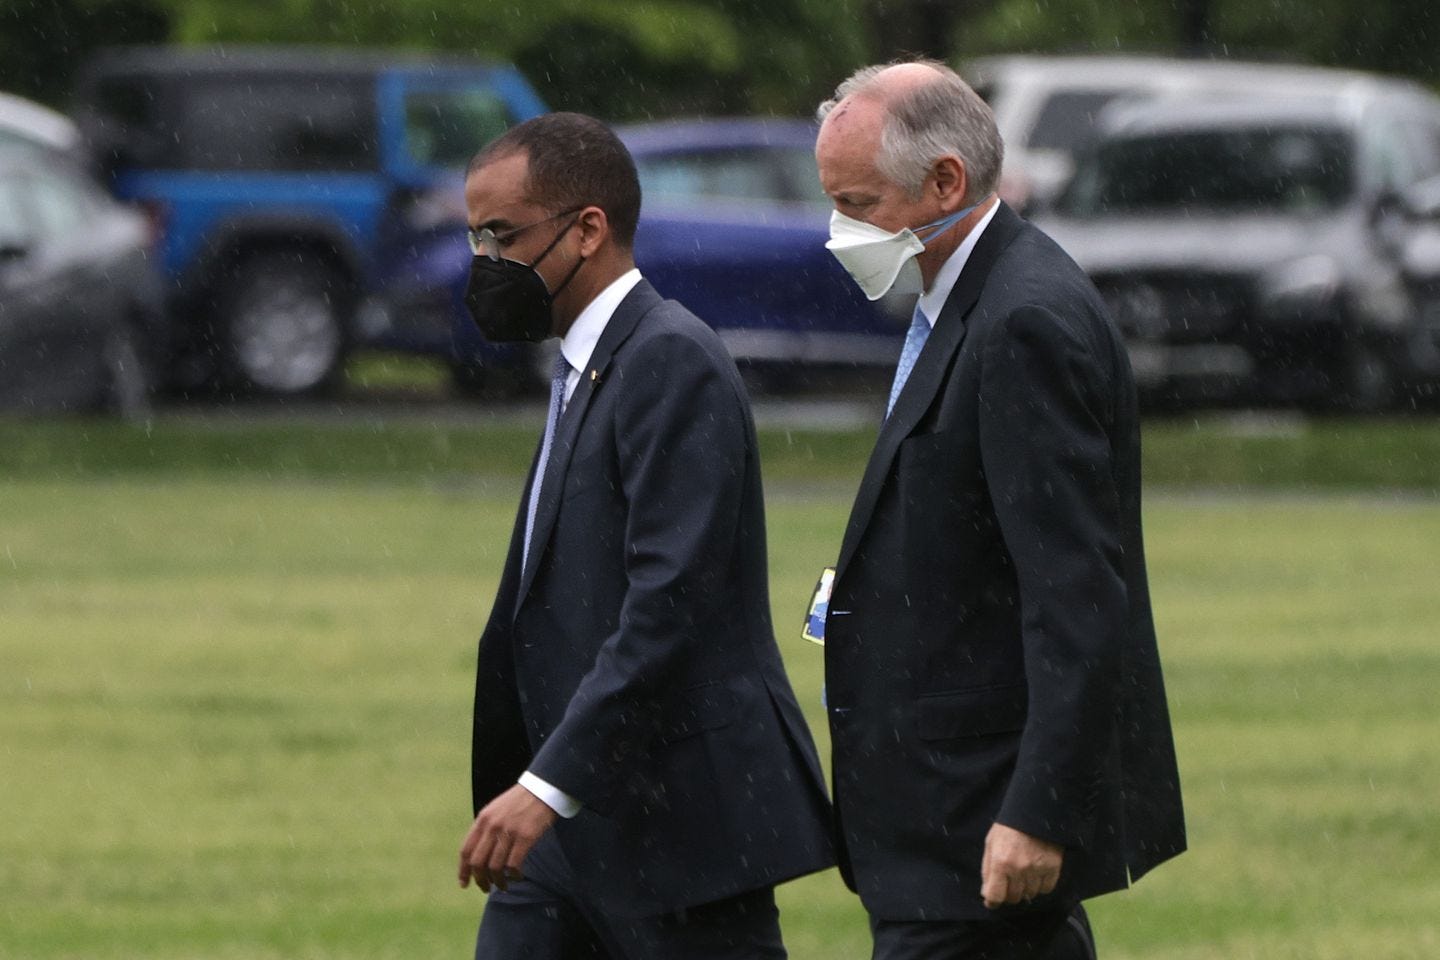 Yohannes Abraham, left chief of staff and executive secretary of the National Security Council, and Steve Ricchetti, right, counselor to President Biden, walked toward the Marine One on May 7 in Washington, D.C. The Treasury Department announced this week it was hiring Ricchetti's son, continuing a pattern in the Biden administration of the relatives of top aides getting jobs.